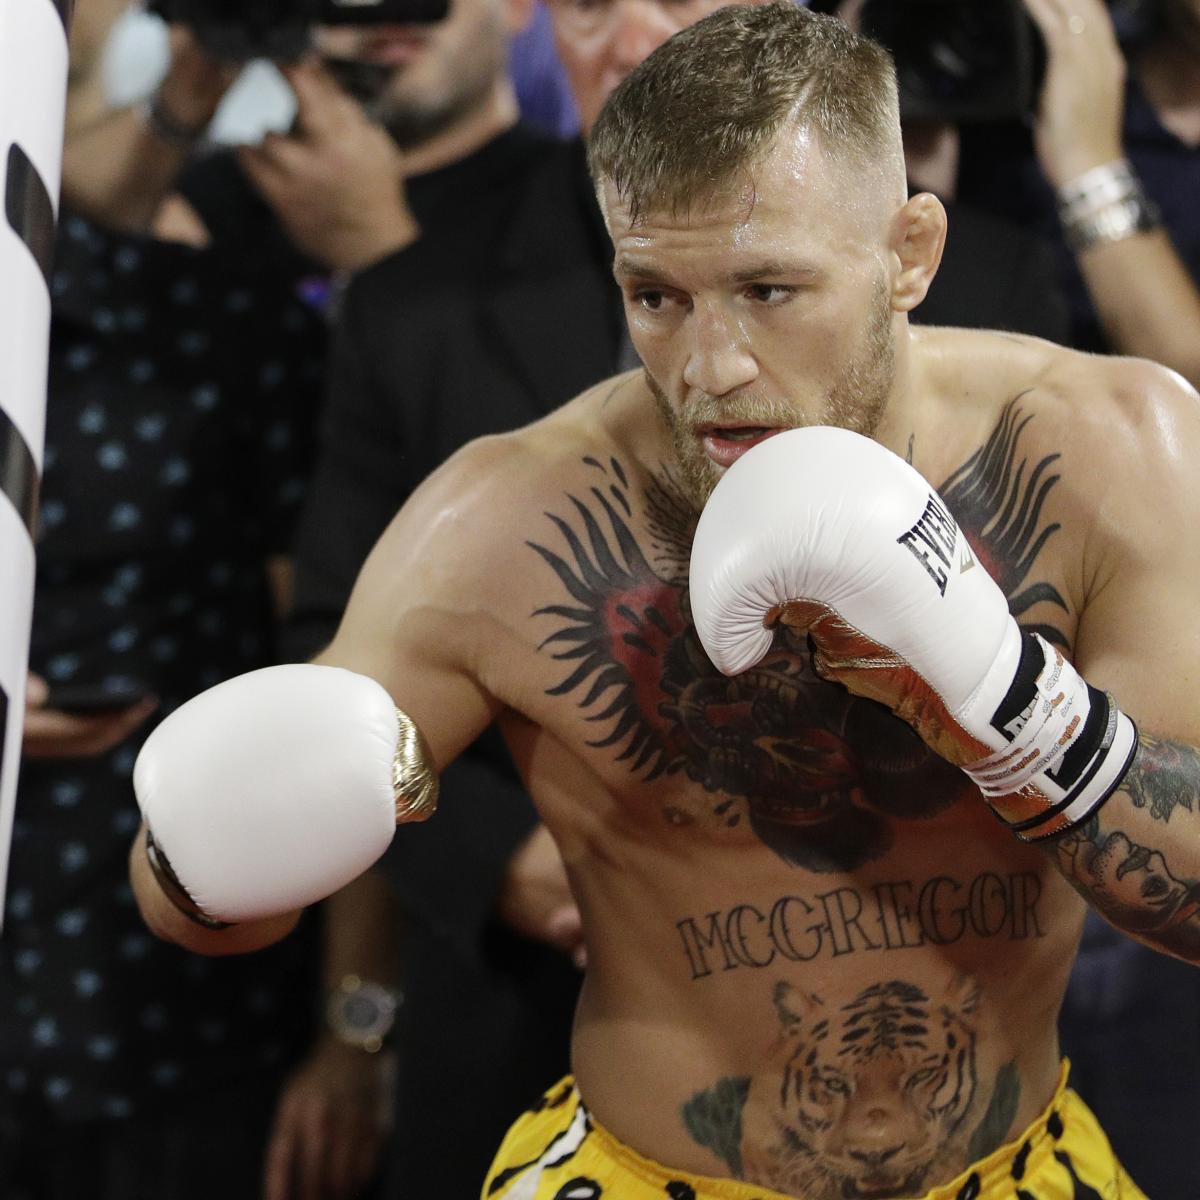 Mayweather vs McGregor: 8oz glove request will be heard by Nevada